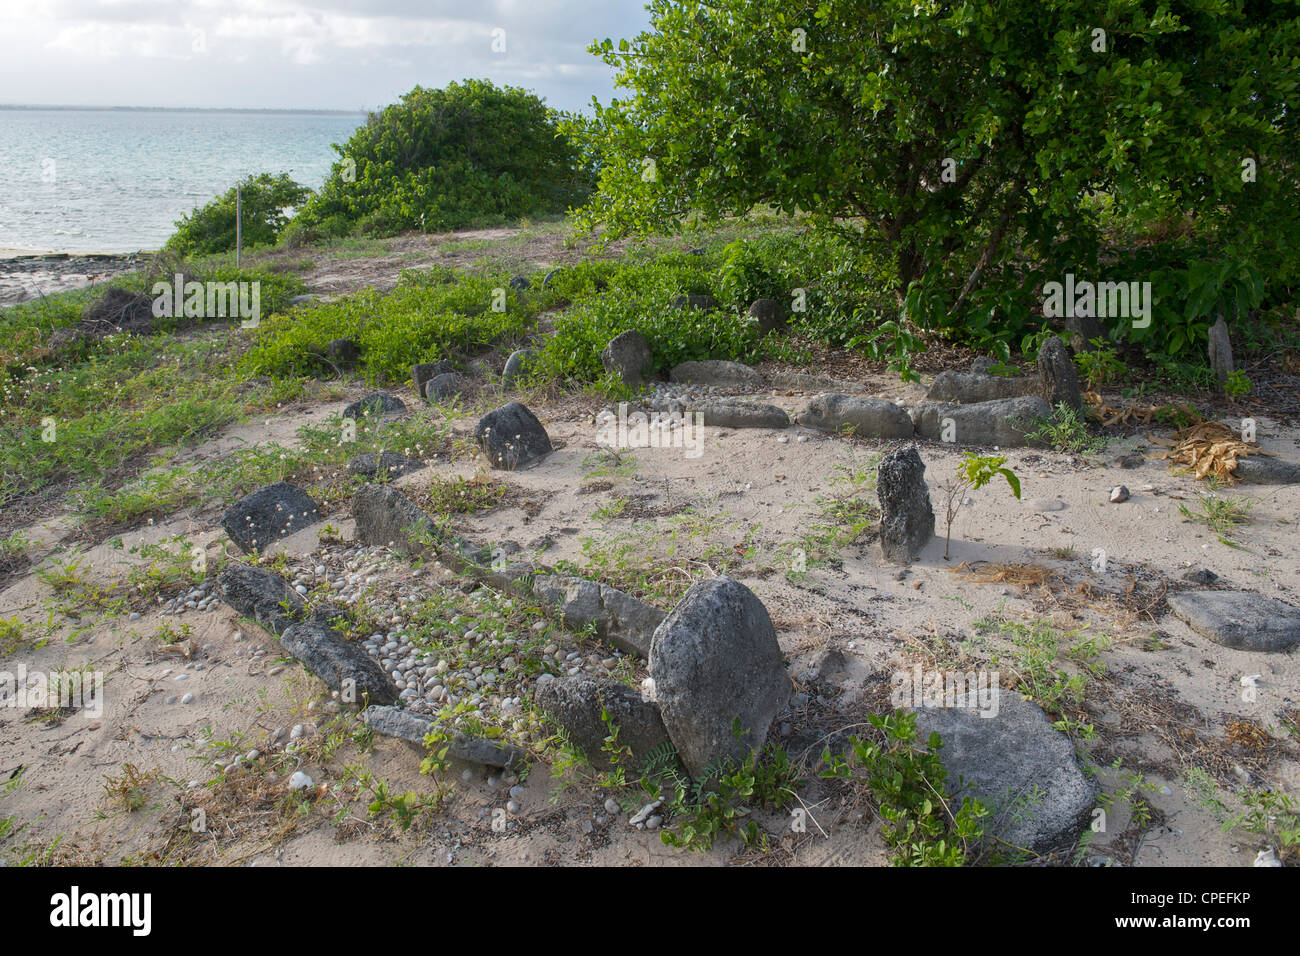 Graves of leprosy victims on Mogundula island in the Quirimbas archipelago in northern Mozambique. Stock Photo